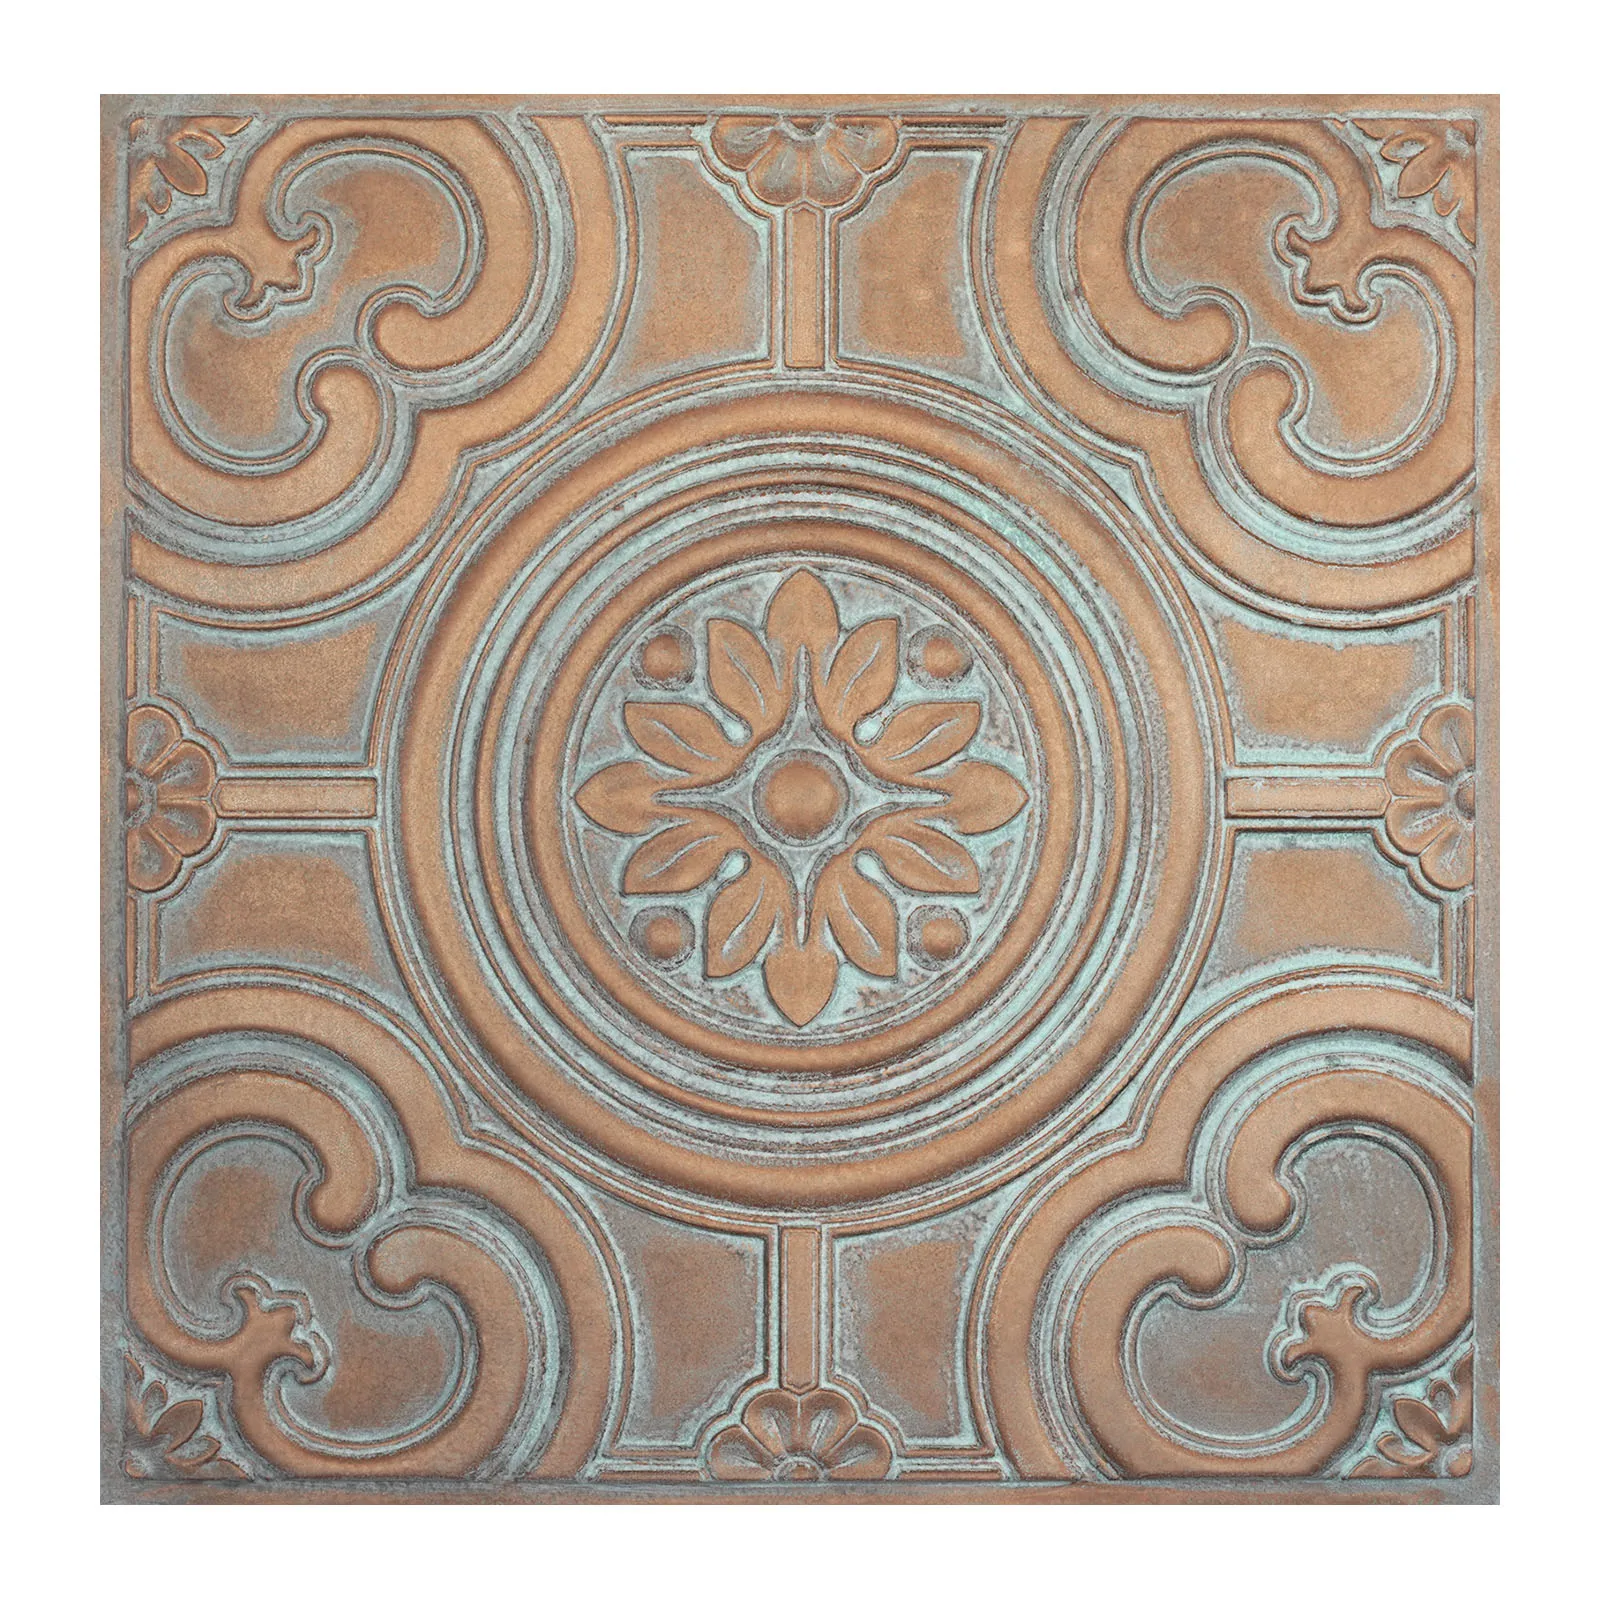 Faux finish Glue up ceiling tiles Aged patina decor wall panels Easy to Install PVC Panels PL50 Weather copper